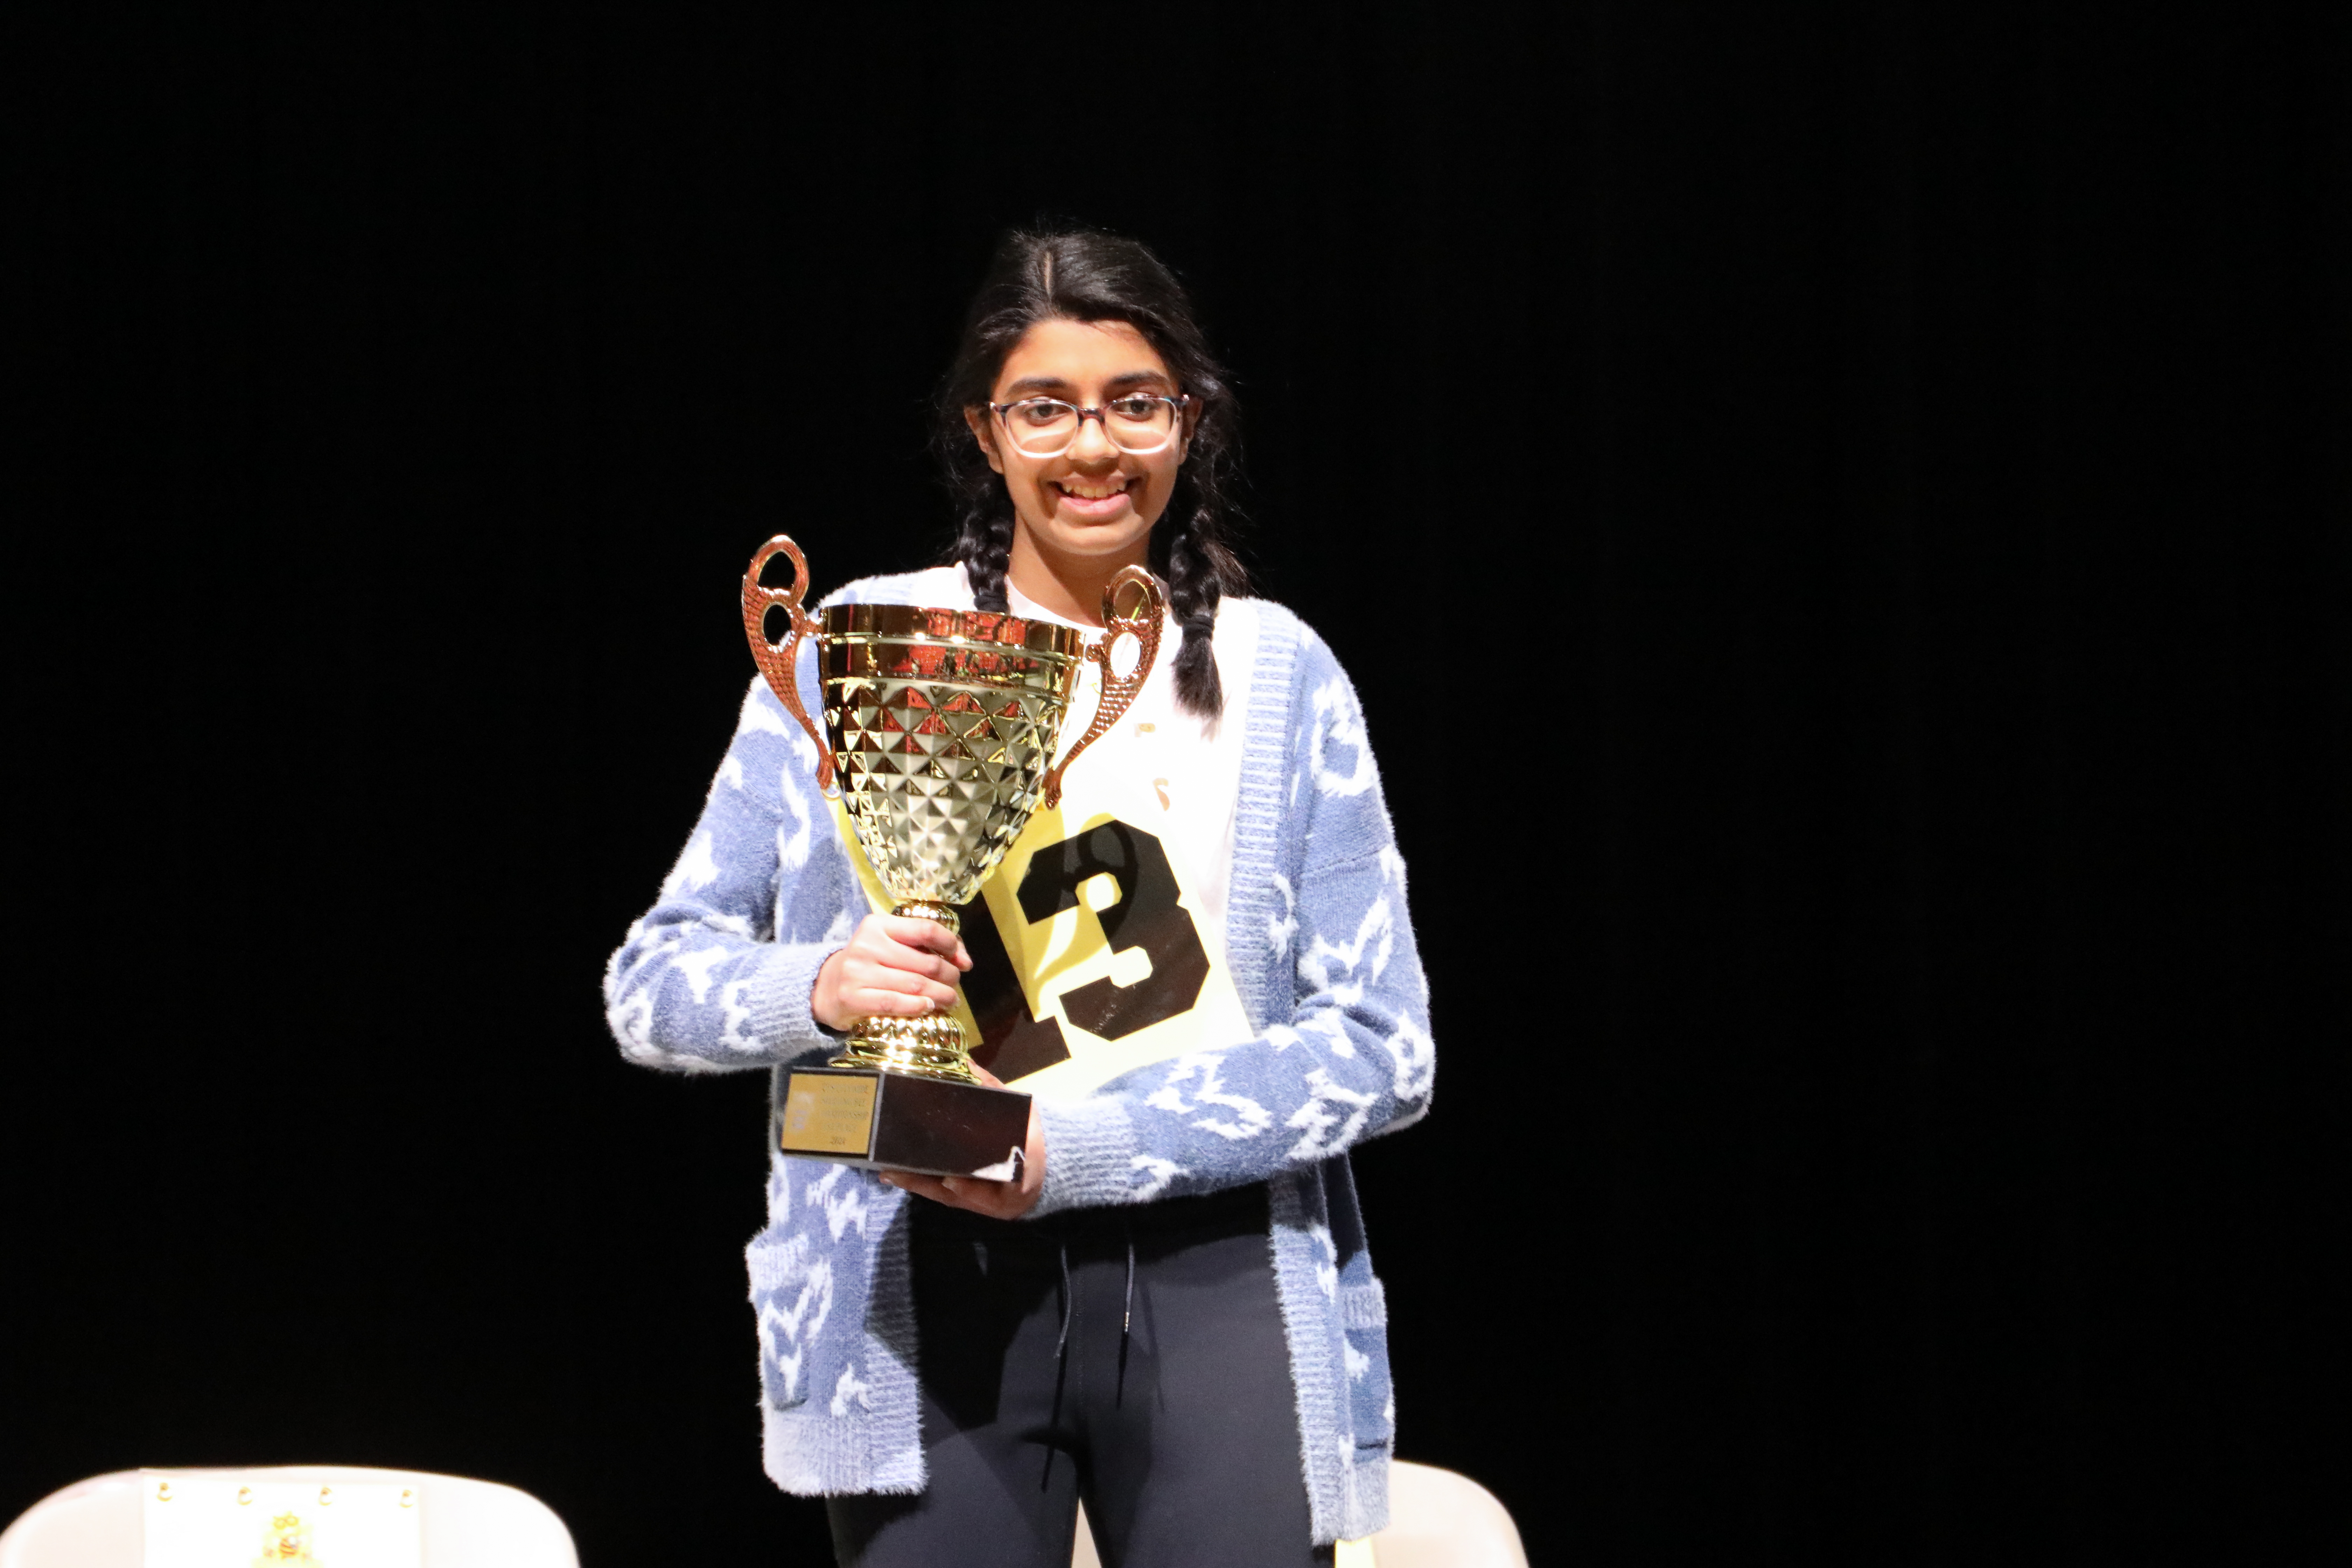 Nidhi with the Citywide Spelling Bee trophy